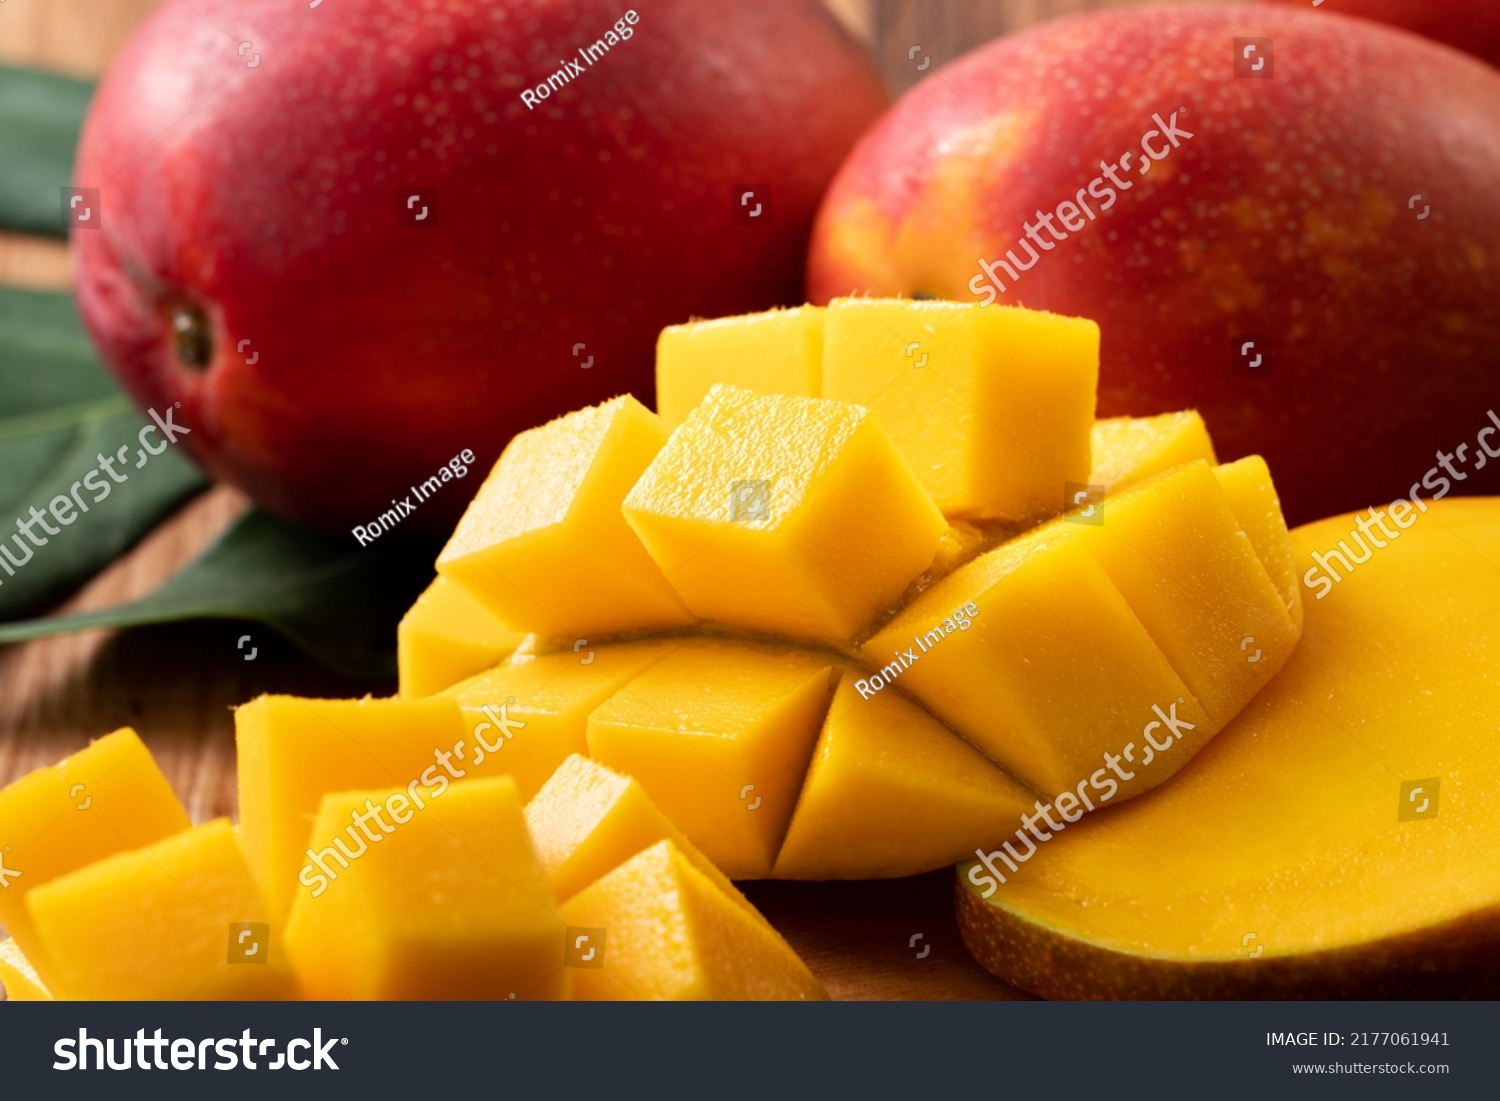 Mango. Close up of fresh ripe mango fruit with leaves over dark wooden table background with green leaves. #2177061941